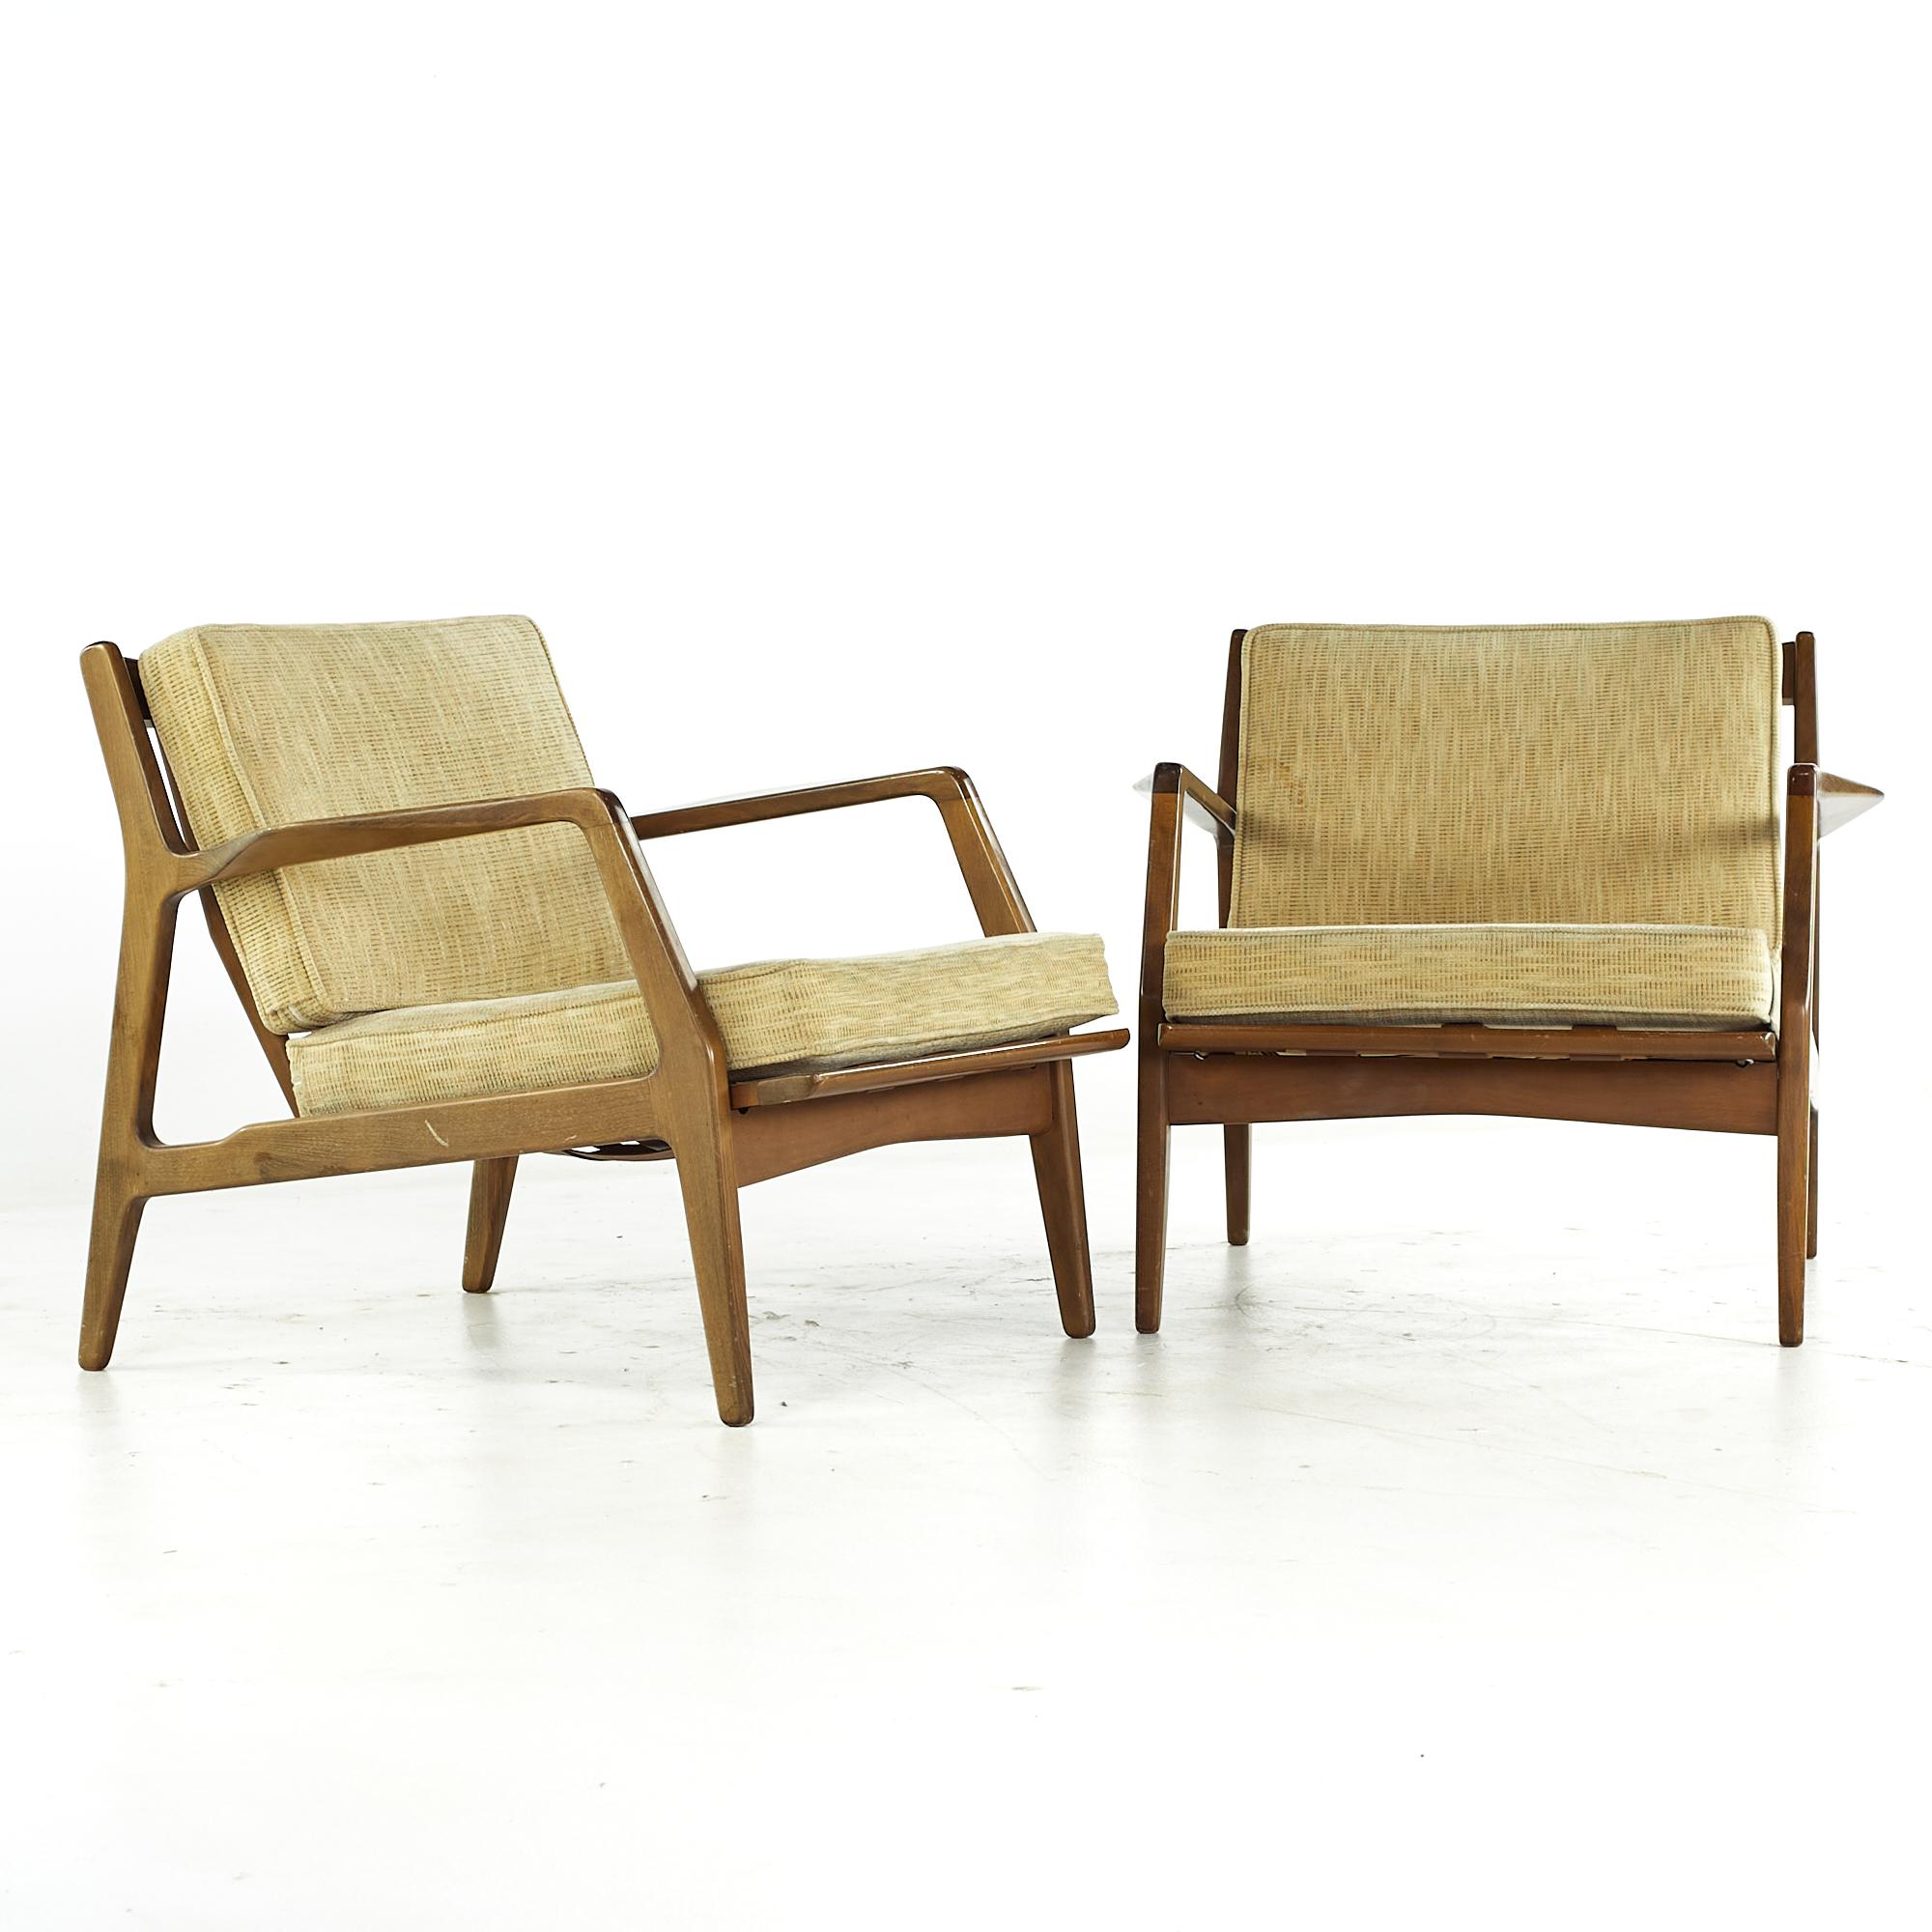 Lawrence Peabody midcentury Walnut Lounge Chairs - Pair

Each chair measures: 30.5 wide x 32 deep x 27 high, with a seat height of 16 and arm height/chair clearance 21.75 inches

All pieces of furniture can be had in what we call restored